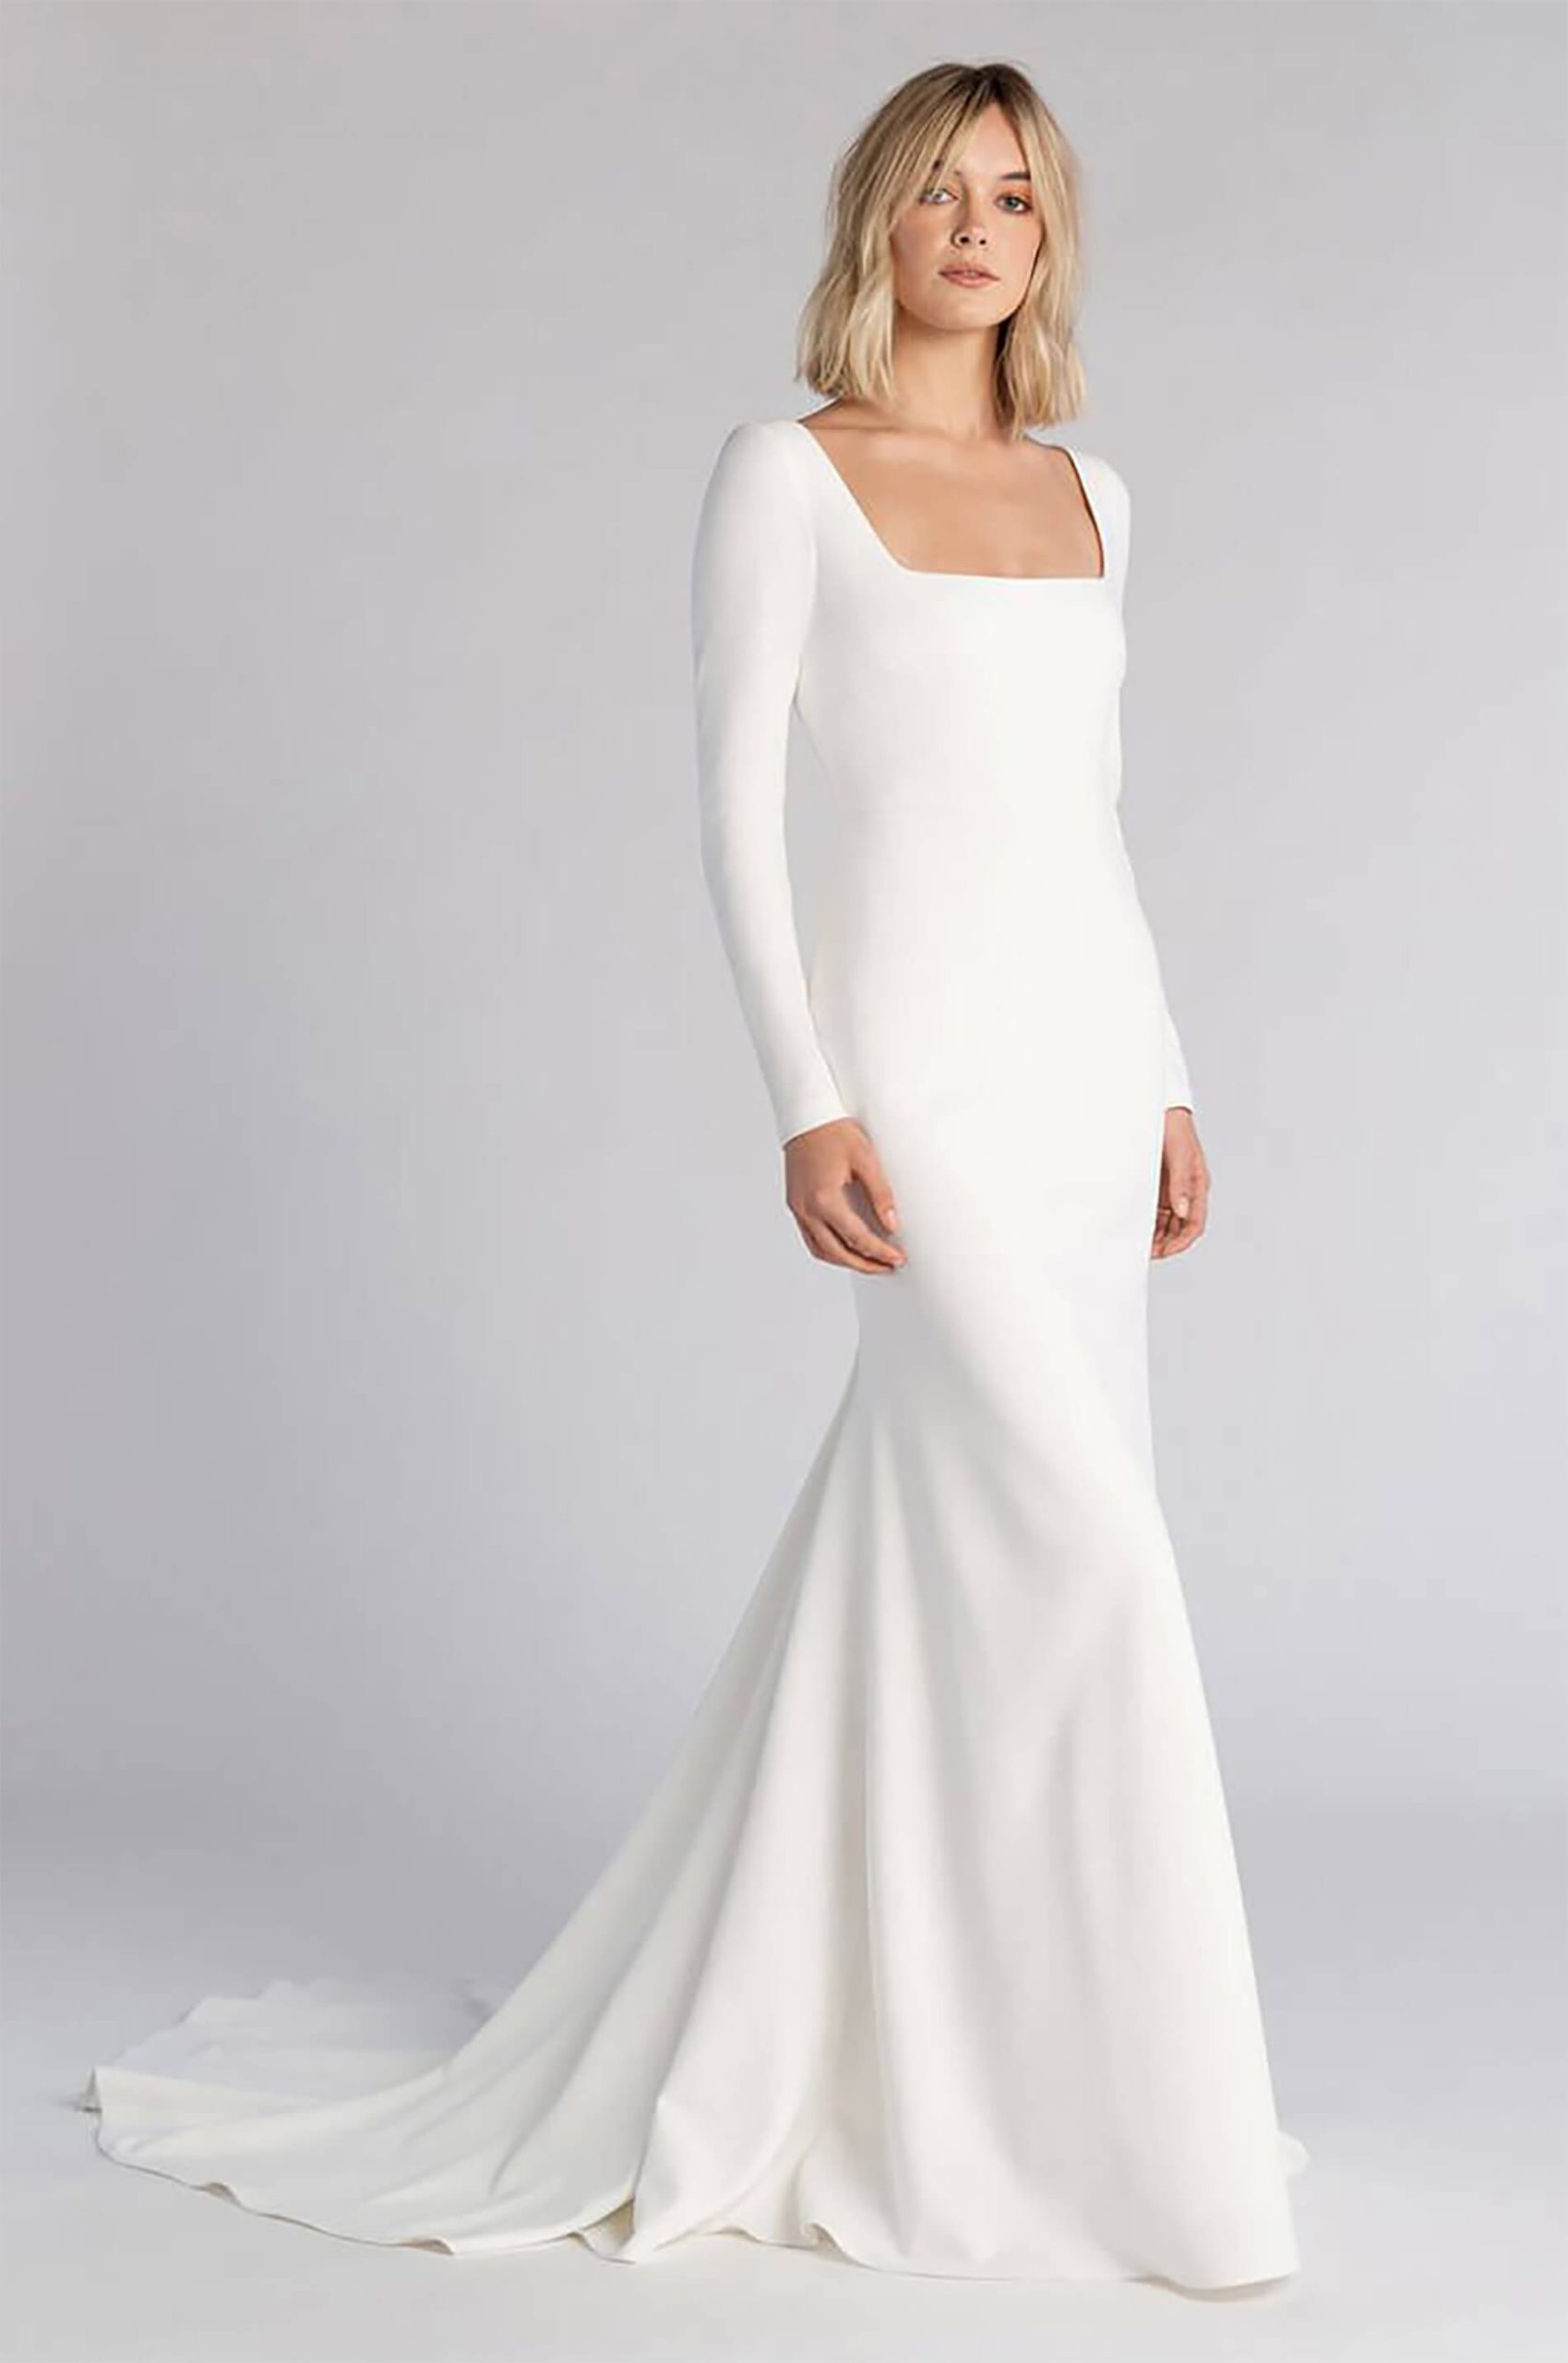 Long sleeve crepe wedding dress with square neckline. Sabel by Jenny Yoo.